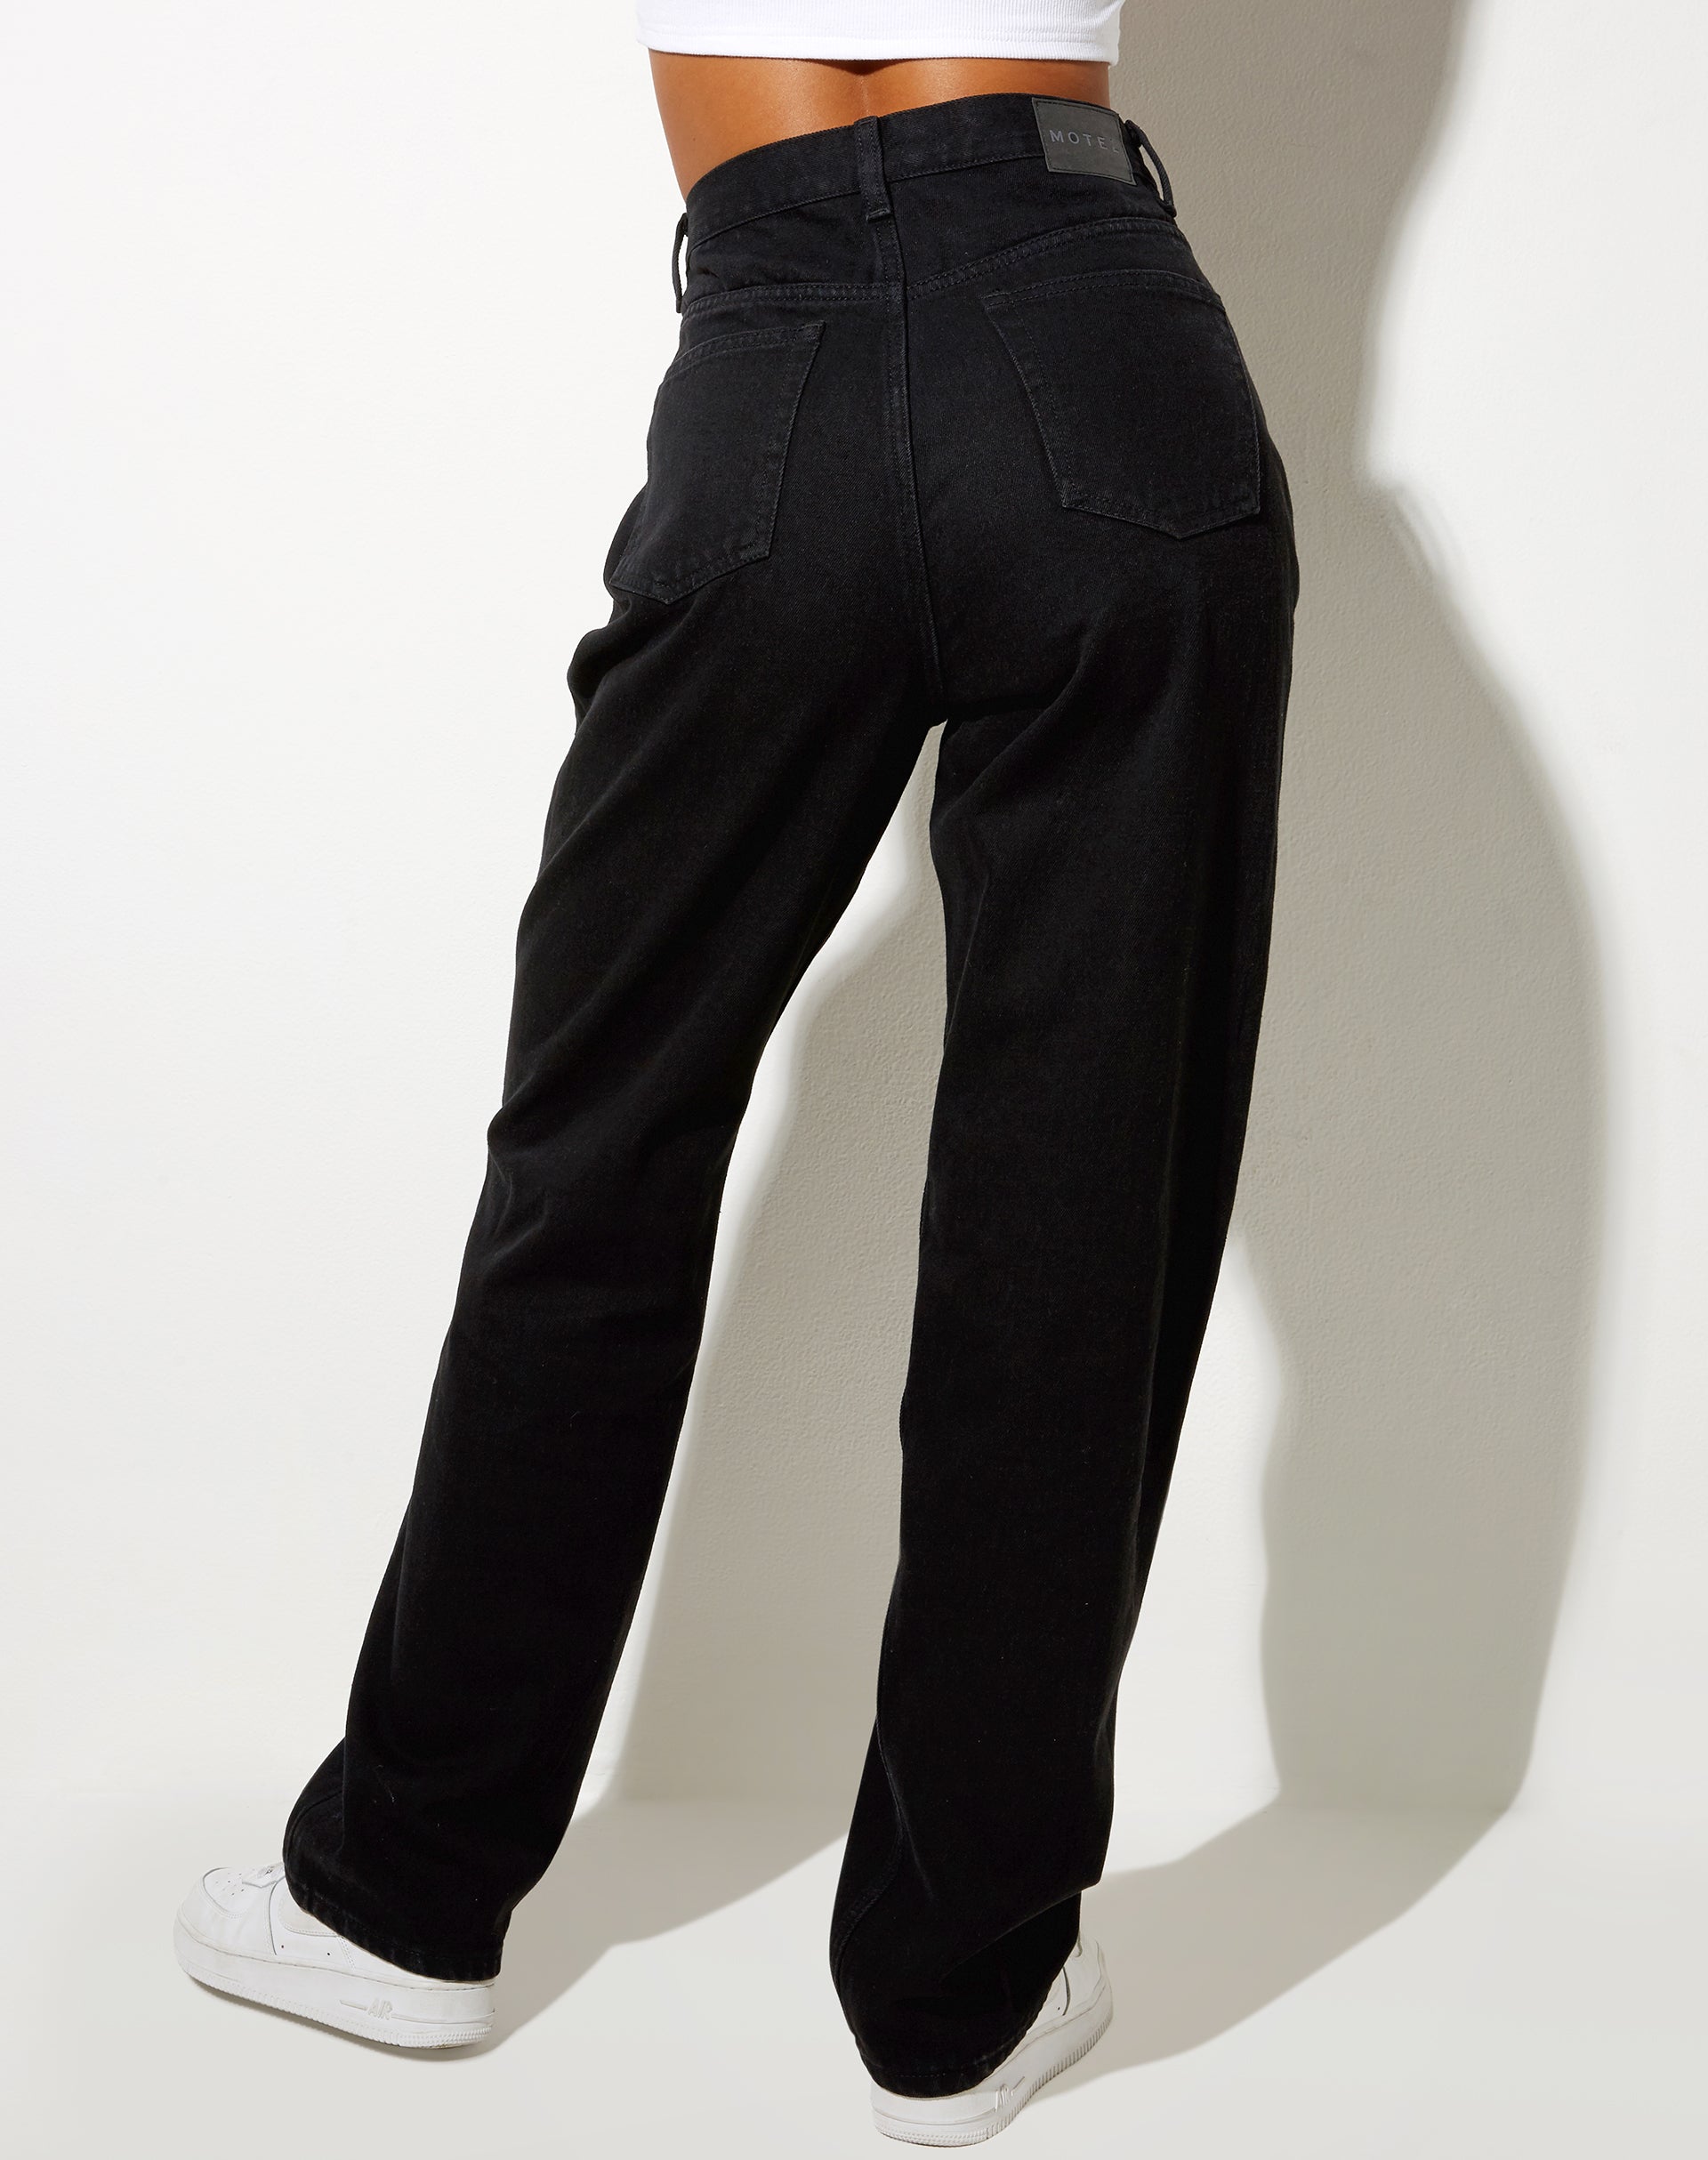 Image of Pleated Jeans in Black Wash